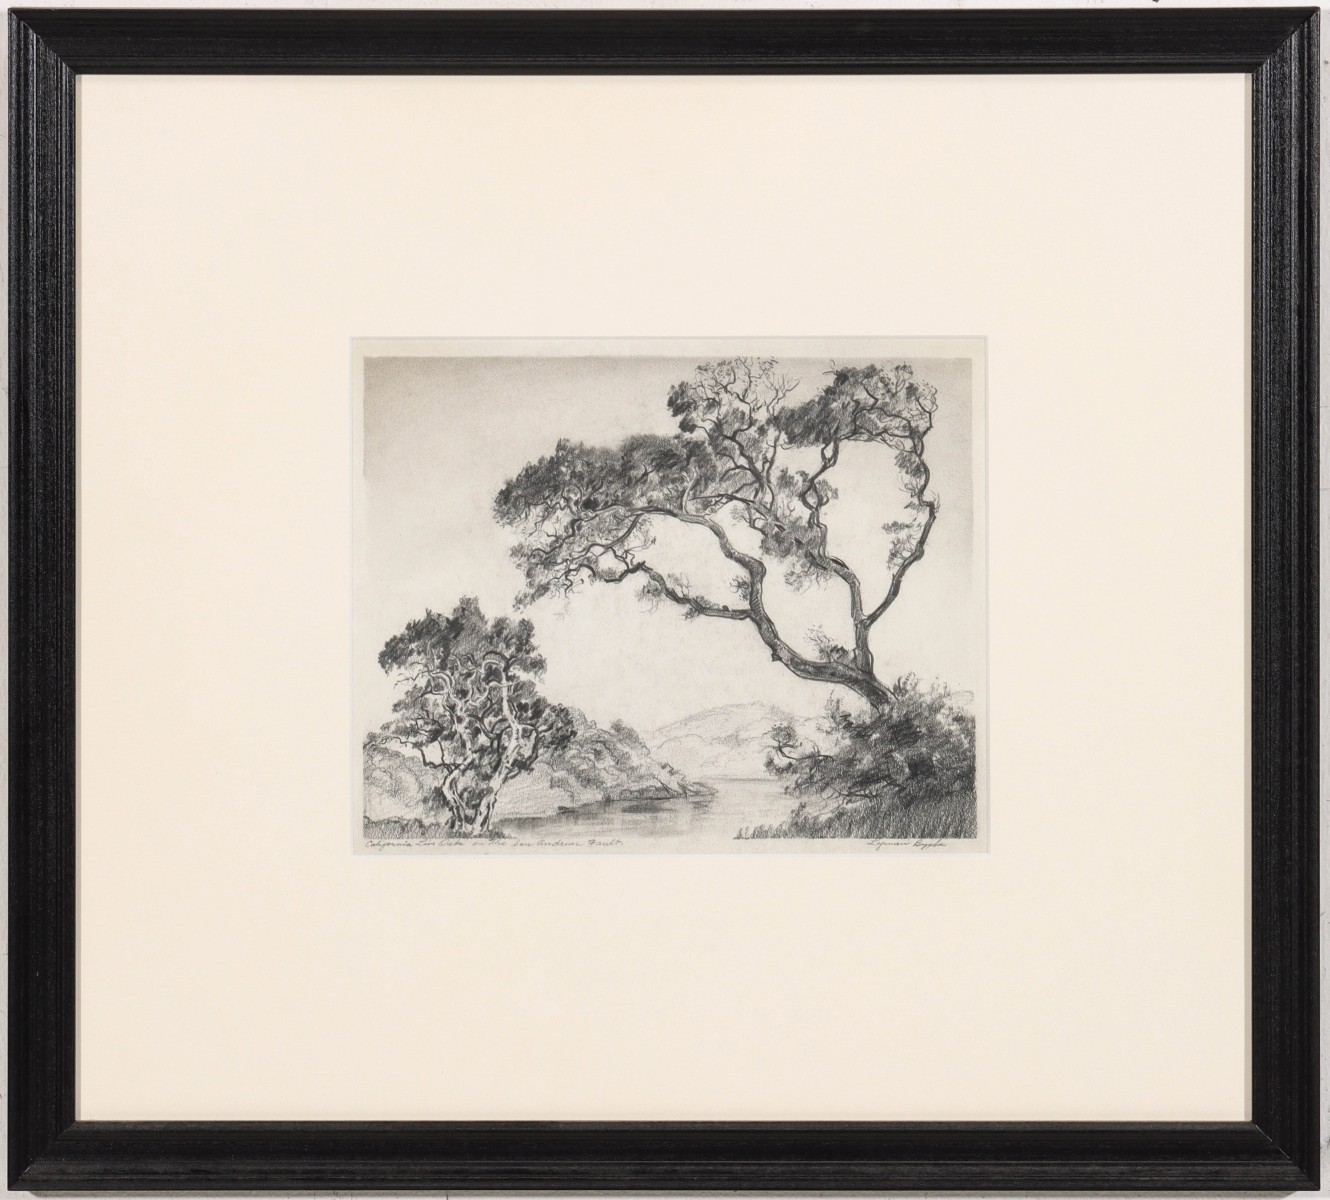 LYMAN BYXBE (1886-1980) GRAPHITE DRAWING ON PAPER